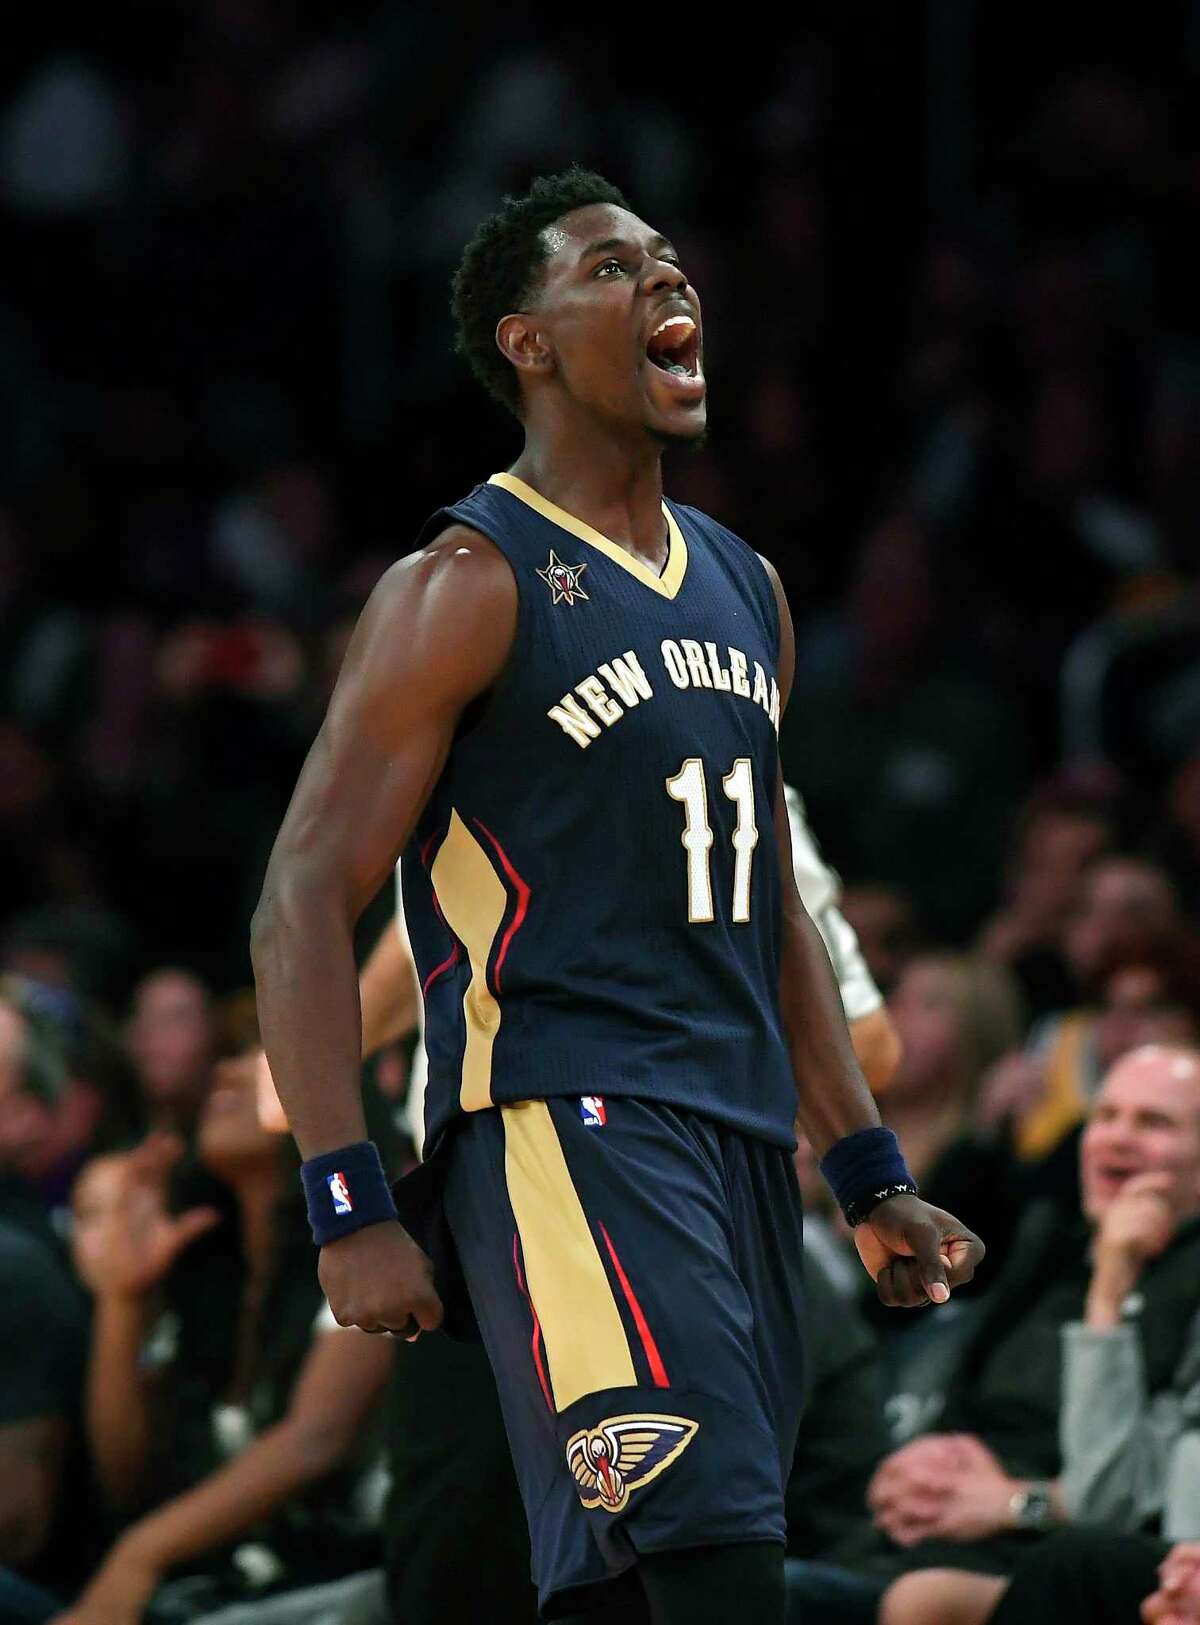 FILE - In this March 5, 2017 file photo, New Orleans Pelicans guard Jrue Holiday celebrates after scoring during the second half of an NBA basketball game against the Los Angeles Lakers. Point guards are cashing in so far in NBA free agency, teams have already paid nearly a half-billion dollars in commitments to five and Day 1 is still a long way from complete. Holiday is among the early cashers-in and has agreed to terms on a new five-year, $126 million deal with the New Orleans Pelicans. (AP Photo/Mark J. Terrill, File) ORG XMIT: NYCD903